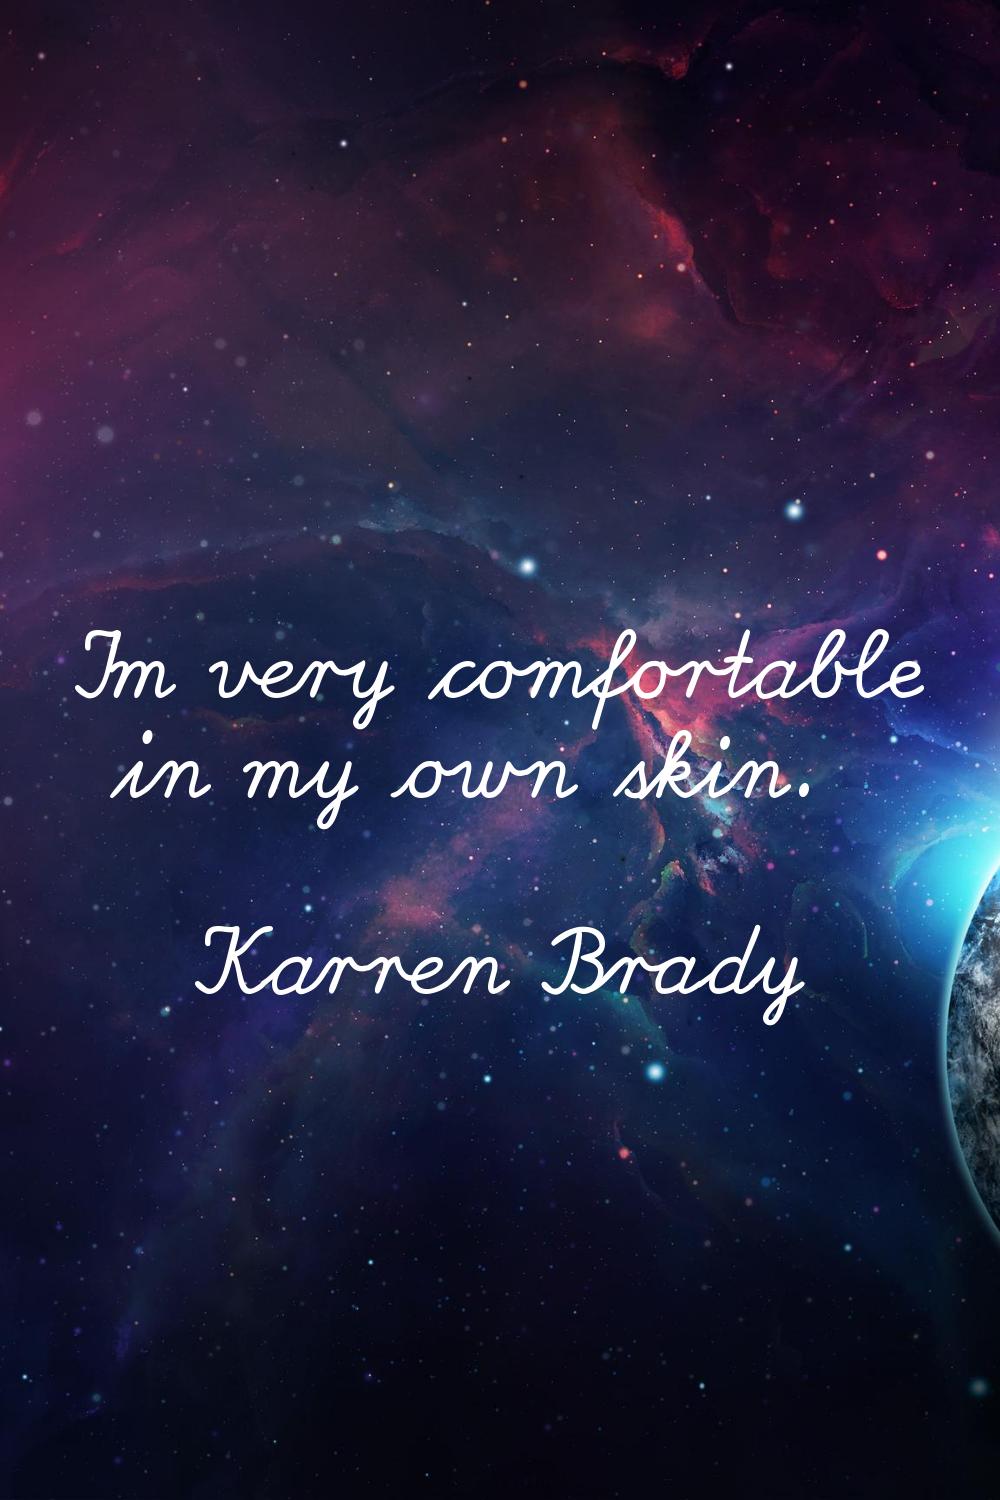 I'm very comfortable in my own skin.